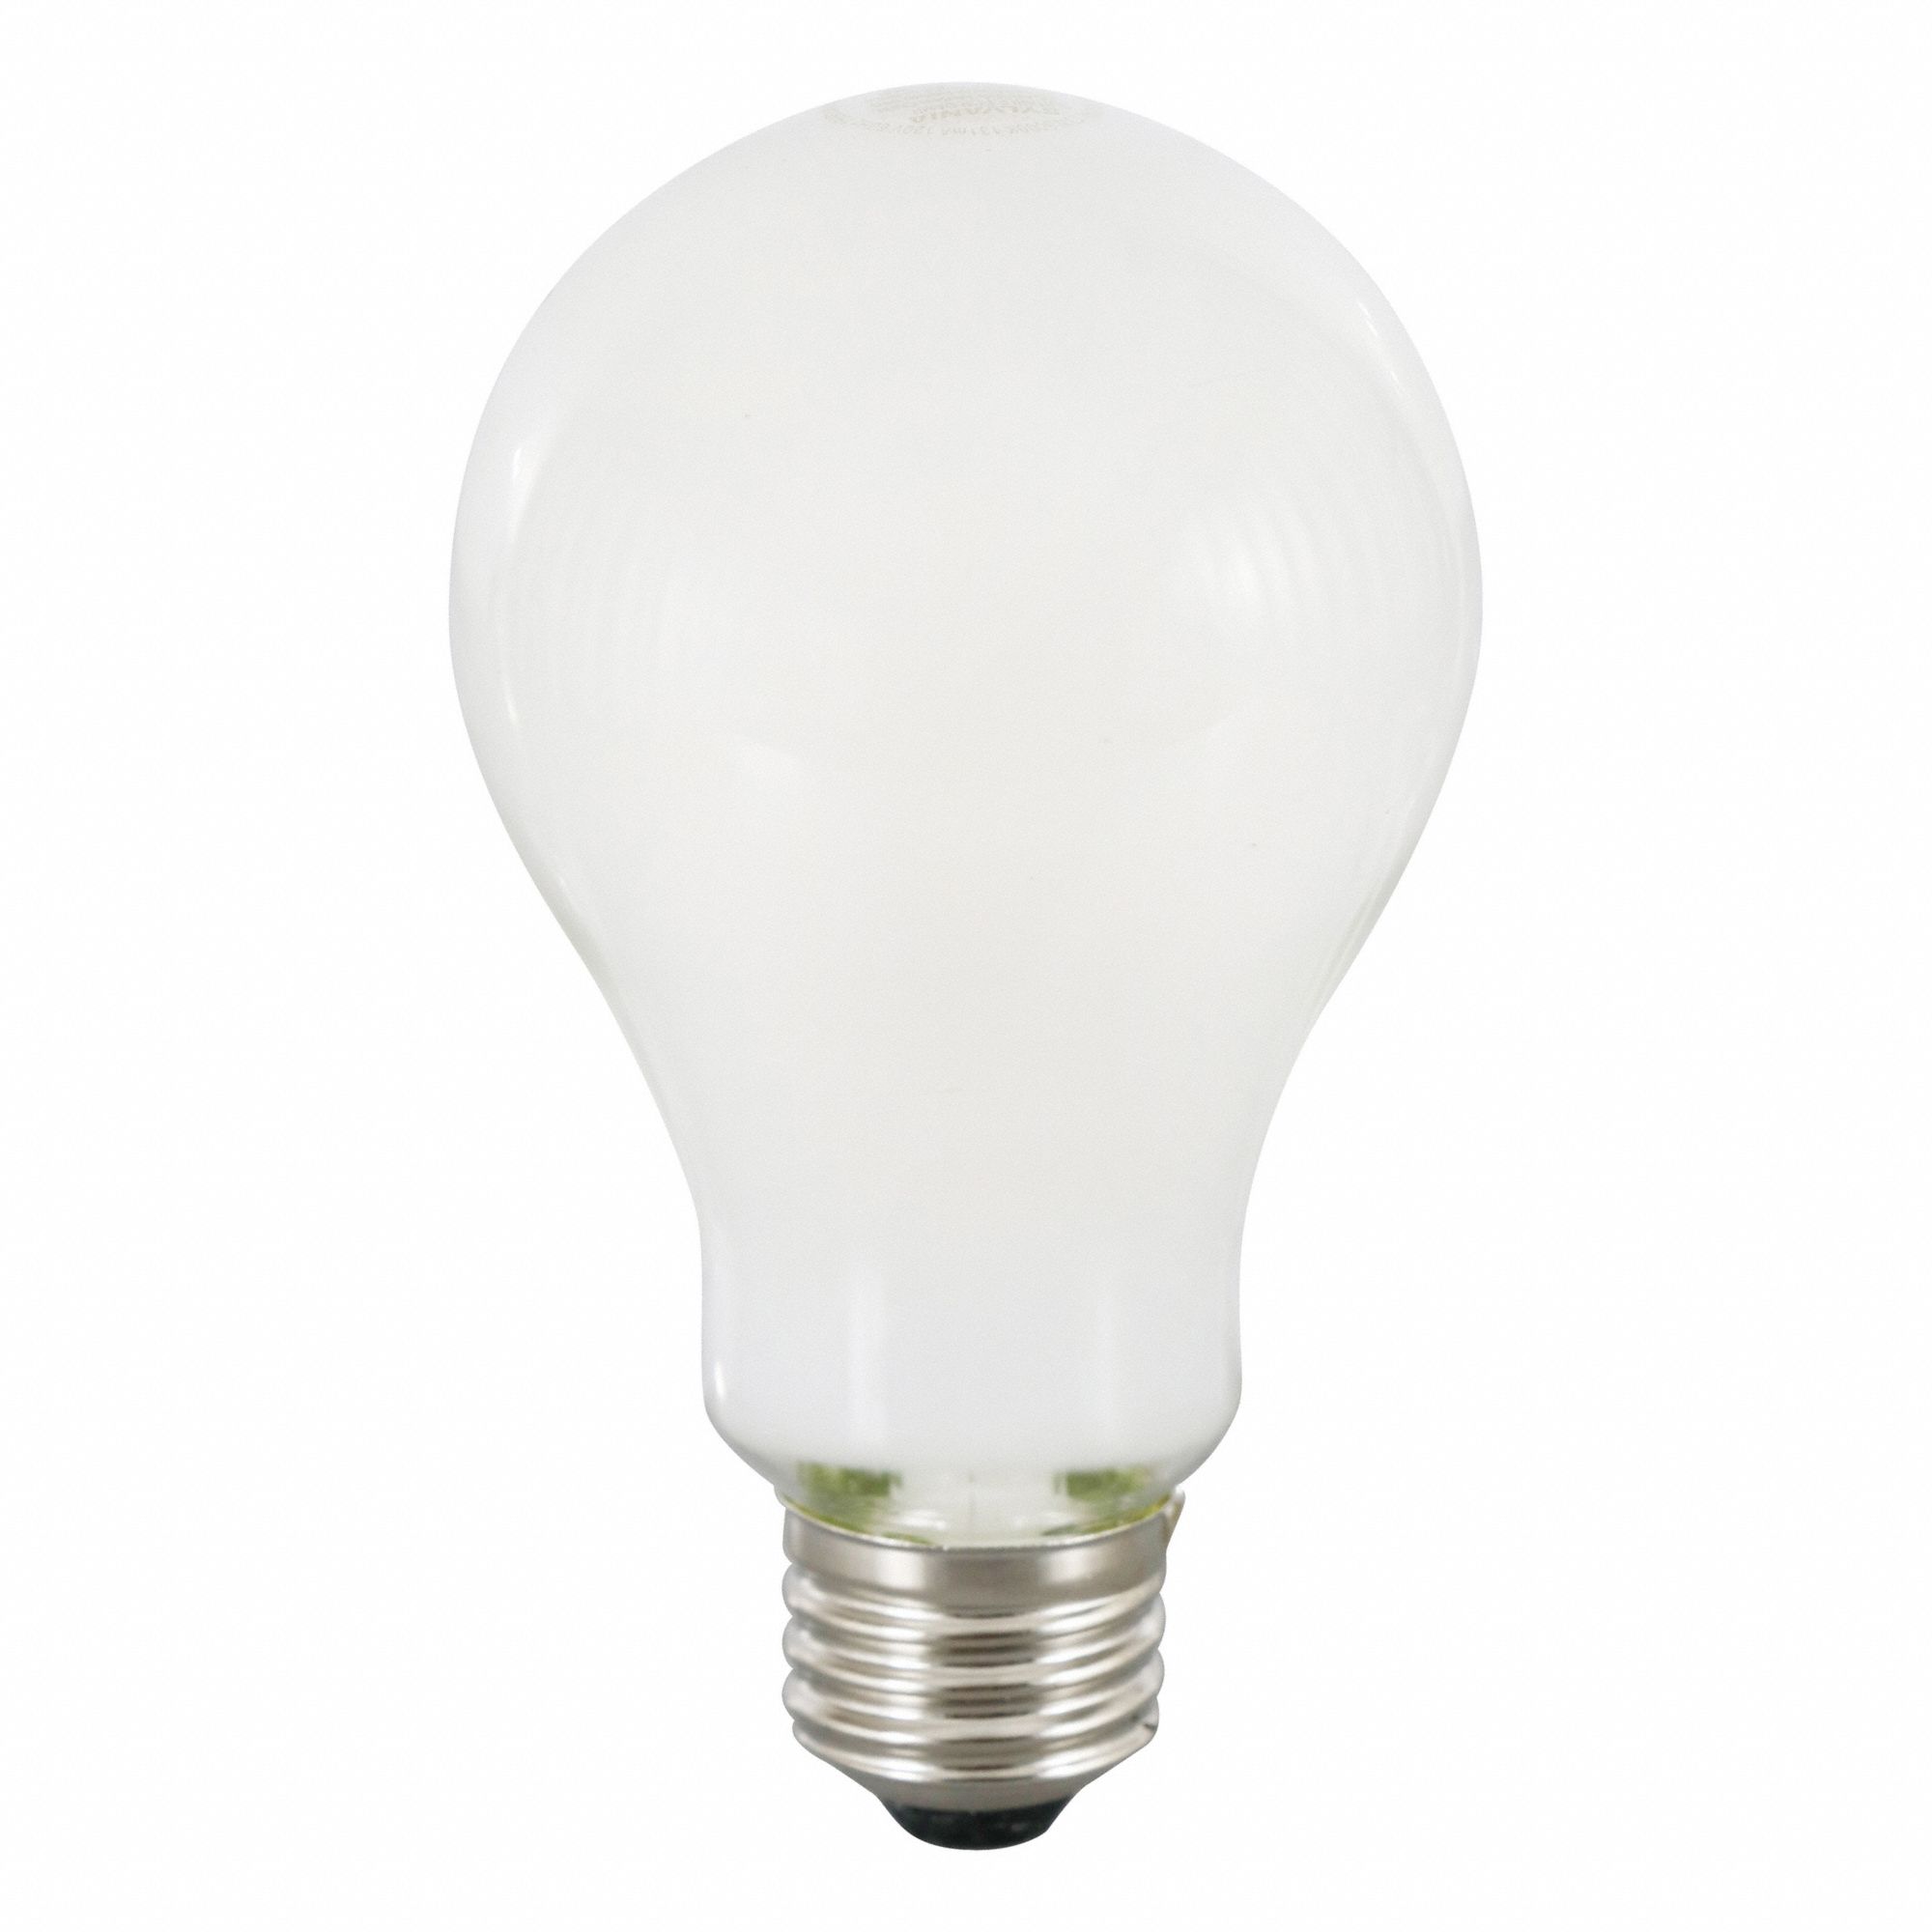 LED BULB, 1600 LM, 15W, 120V AC, 3,000K, WARM WHITE/DAYLIGHT, 4.57 IN L, SHATTER-RESISTANT, E26, A21